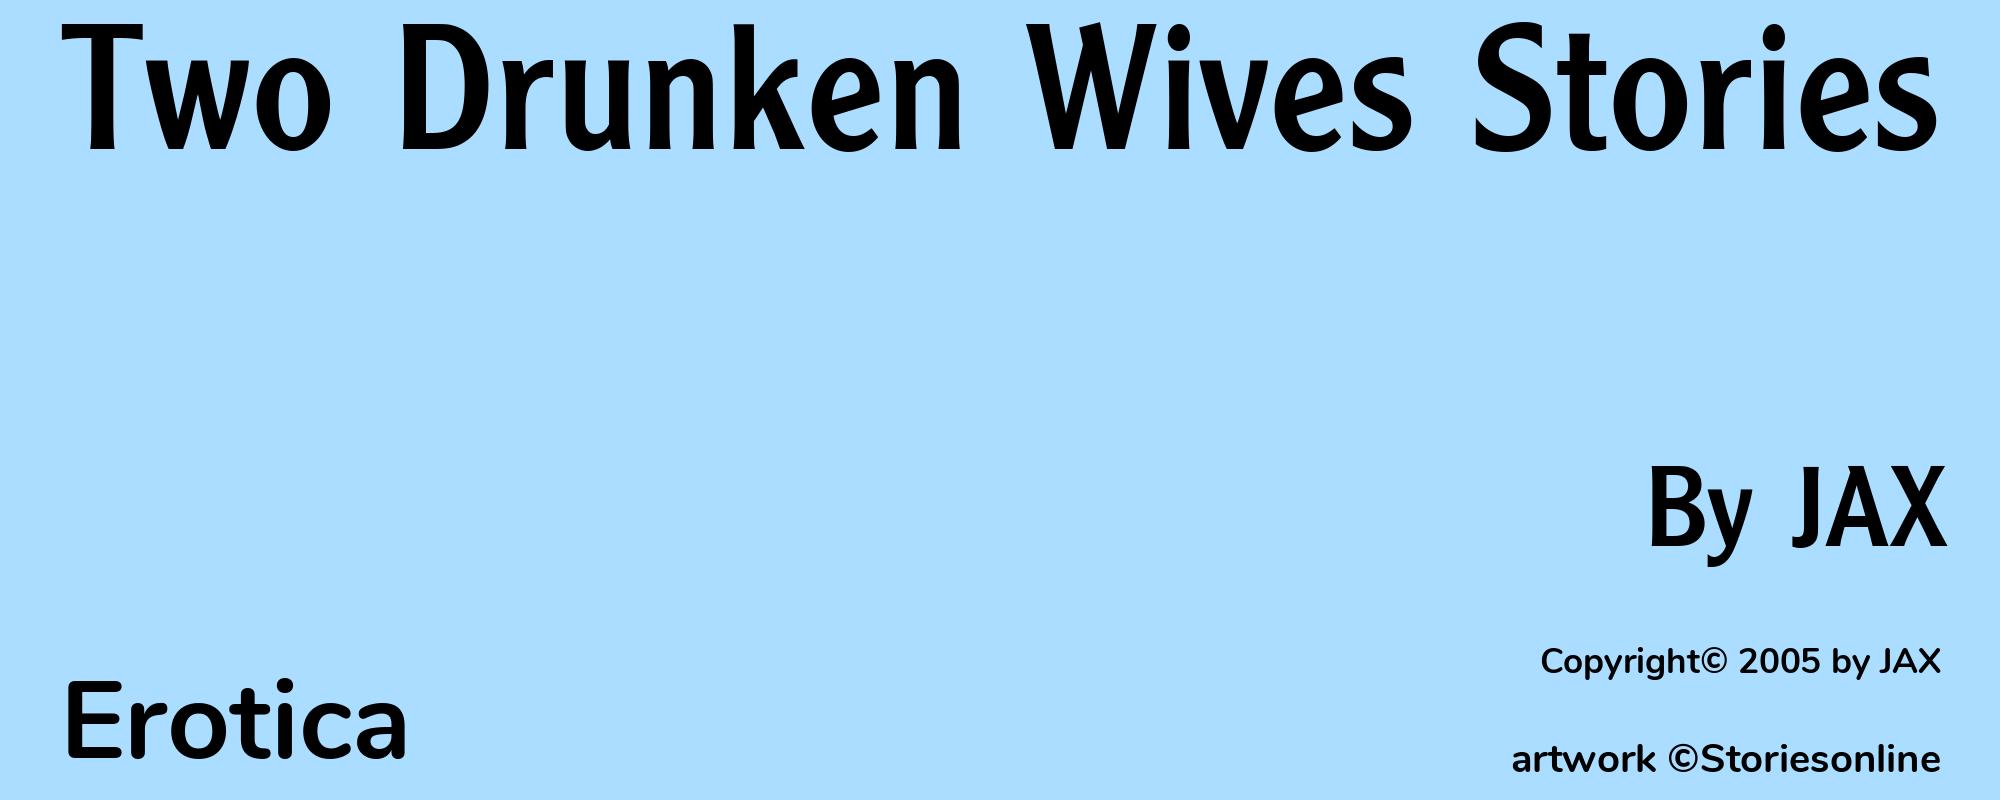 Two Drunken Wives Stories - Cover